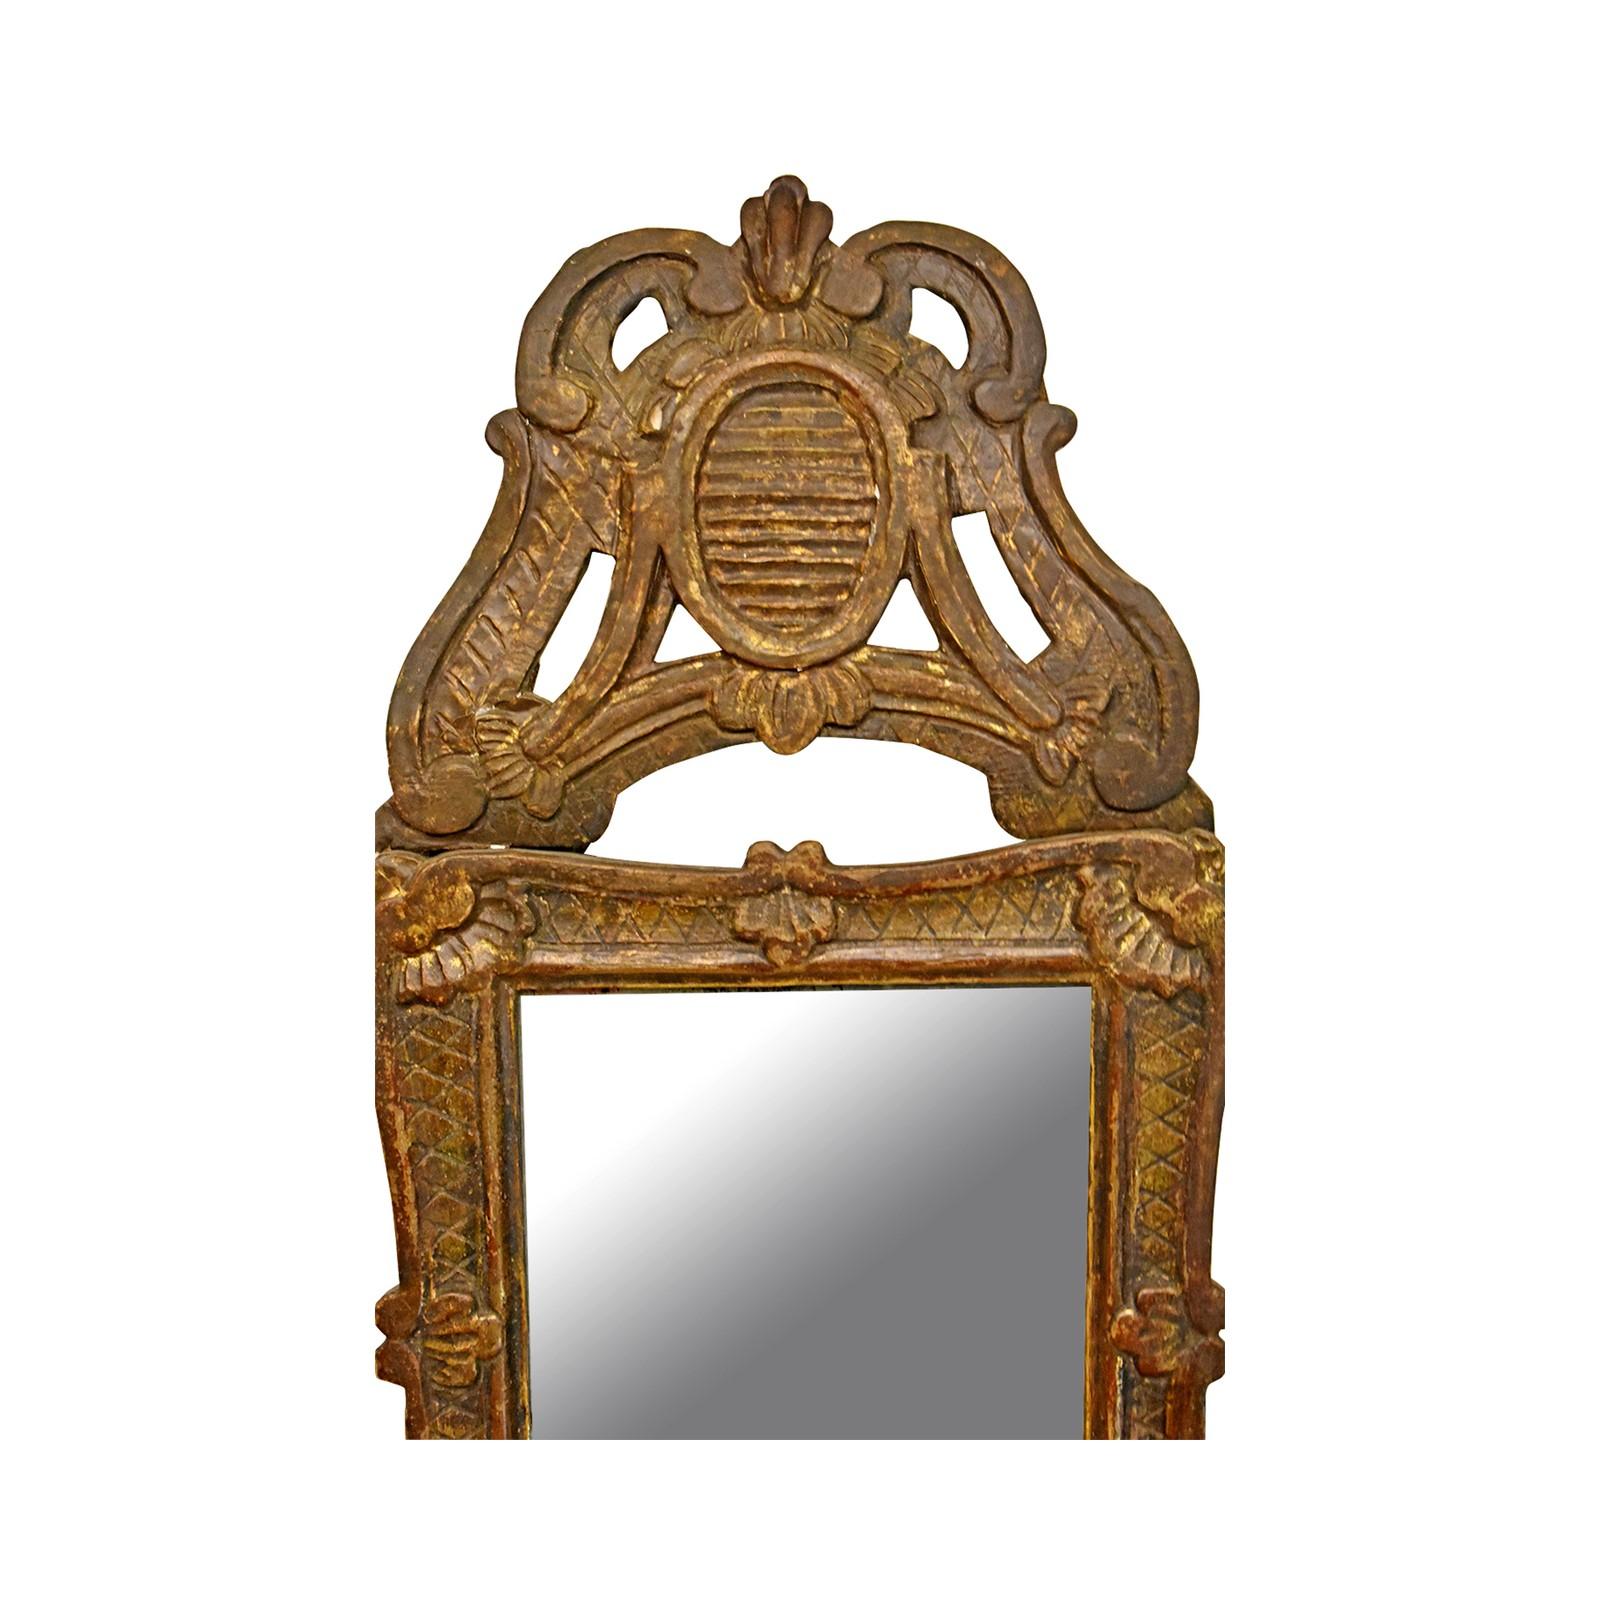 Early 18th Century Regence giltwood mirror

Approx. 24